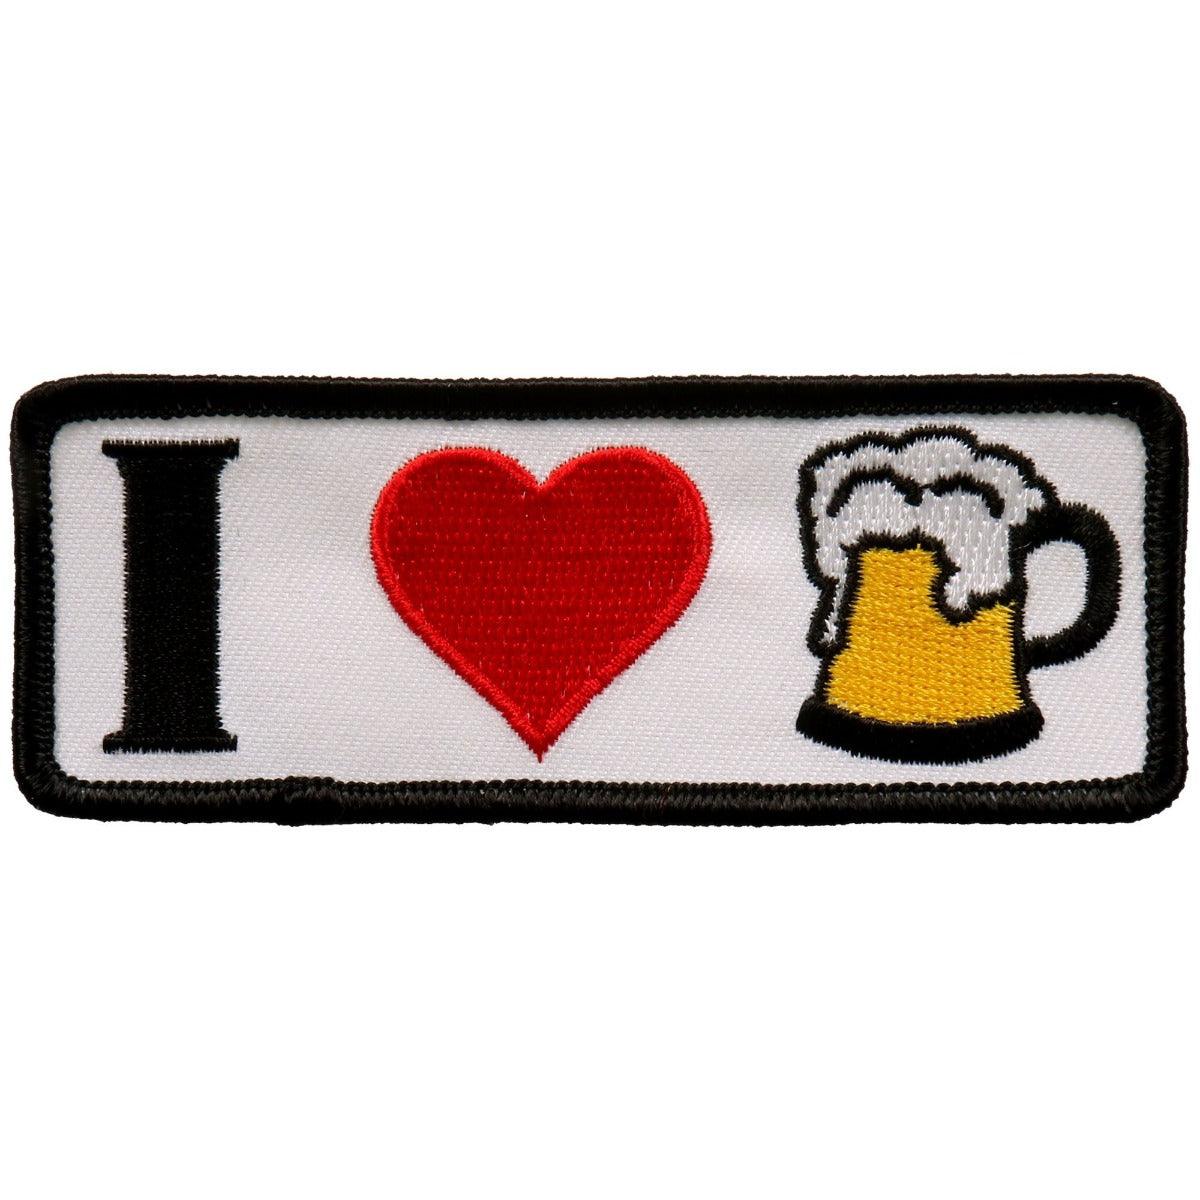 Hot Leathers I Heart Beer 4"X2" Patch - American Legend Rider